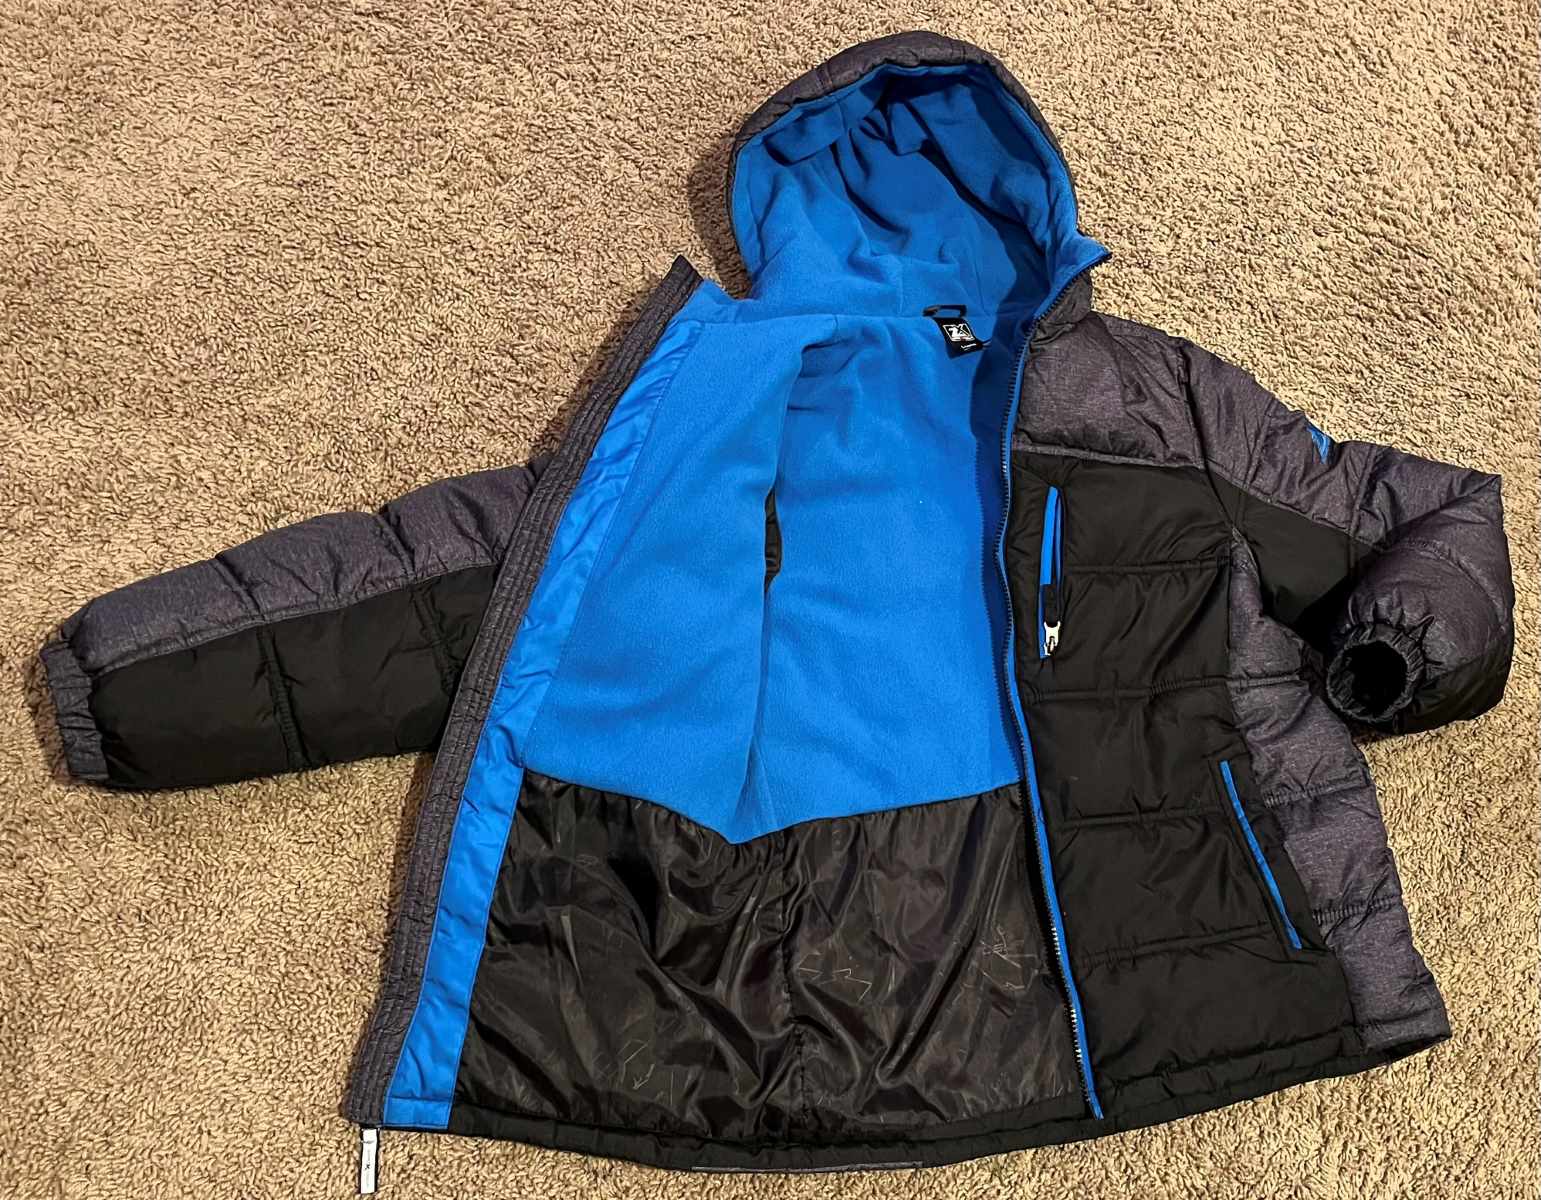 How Much Do Zeroxposur Activewear Jackets Go For?